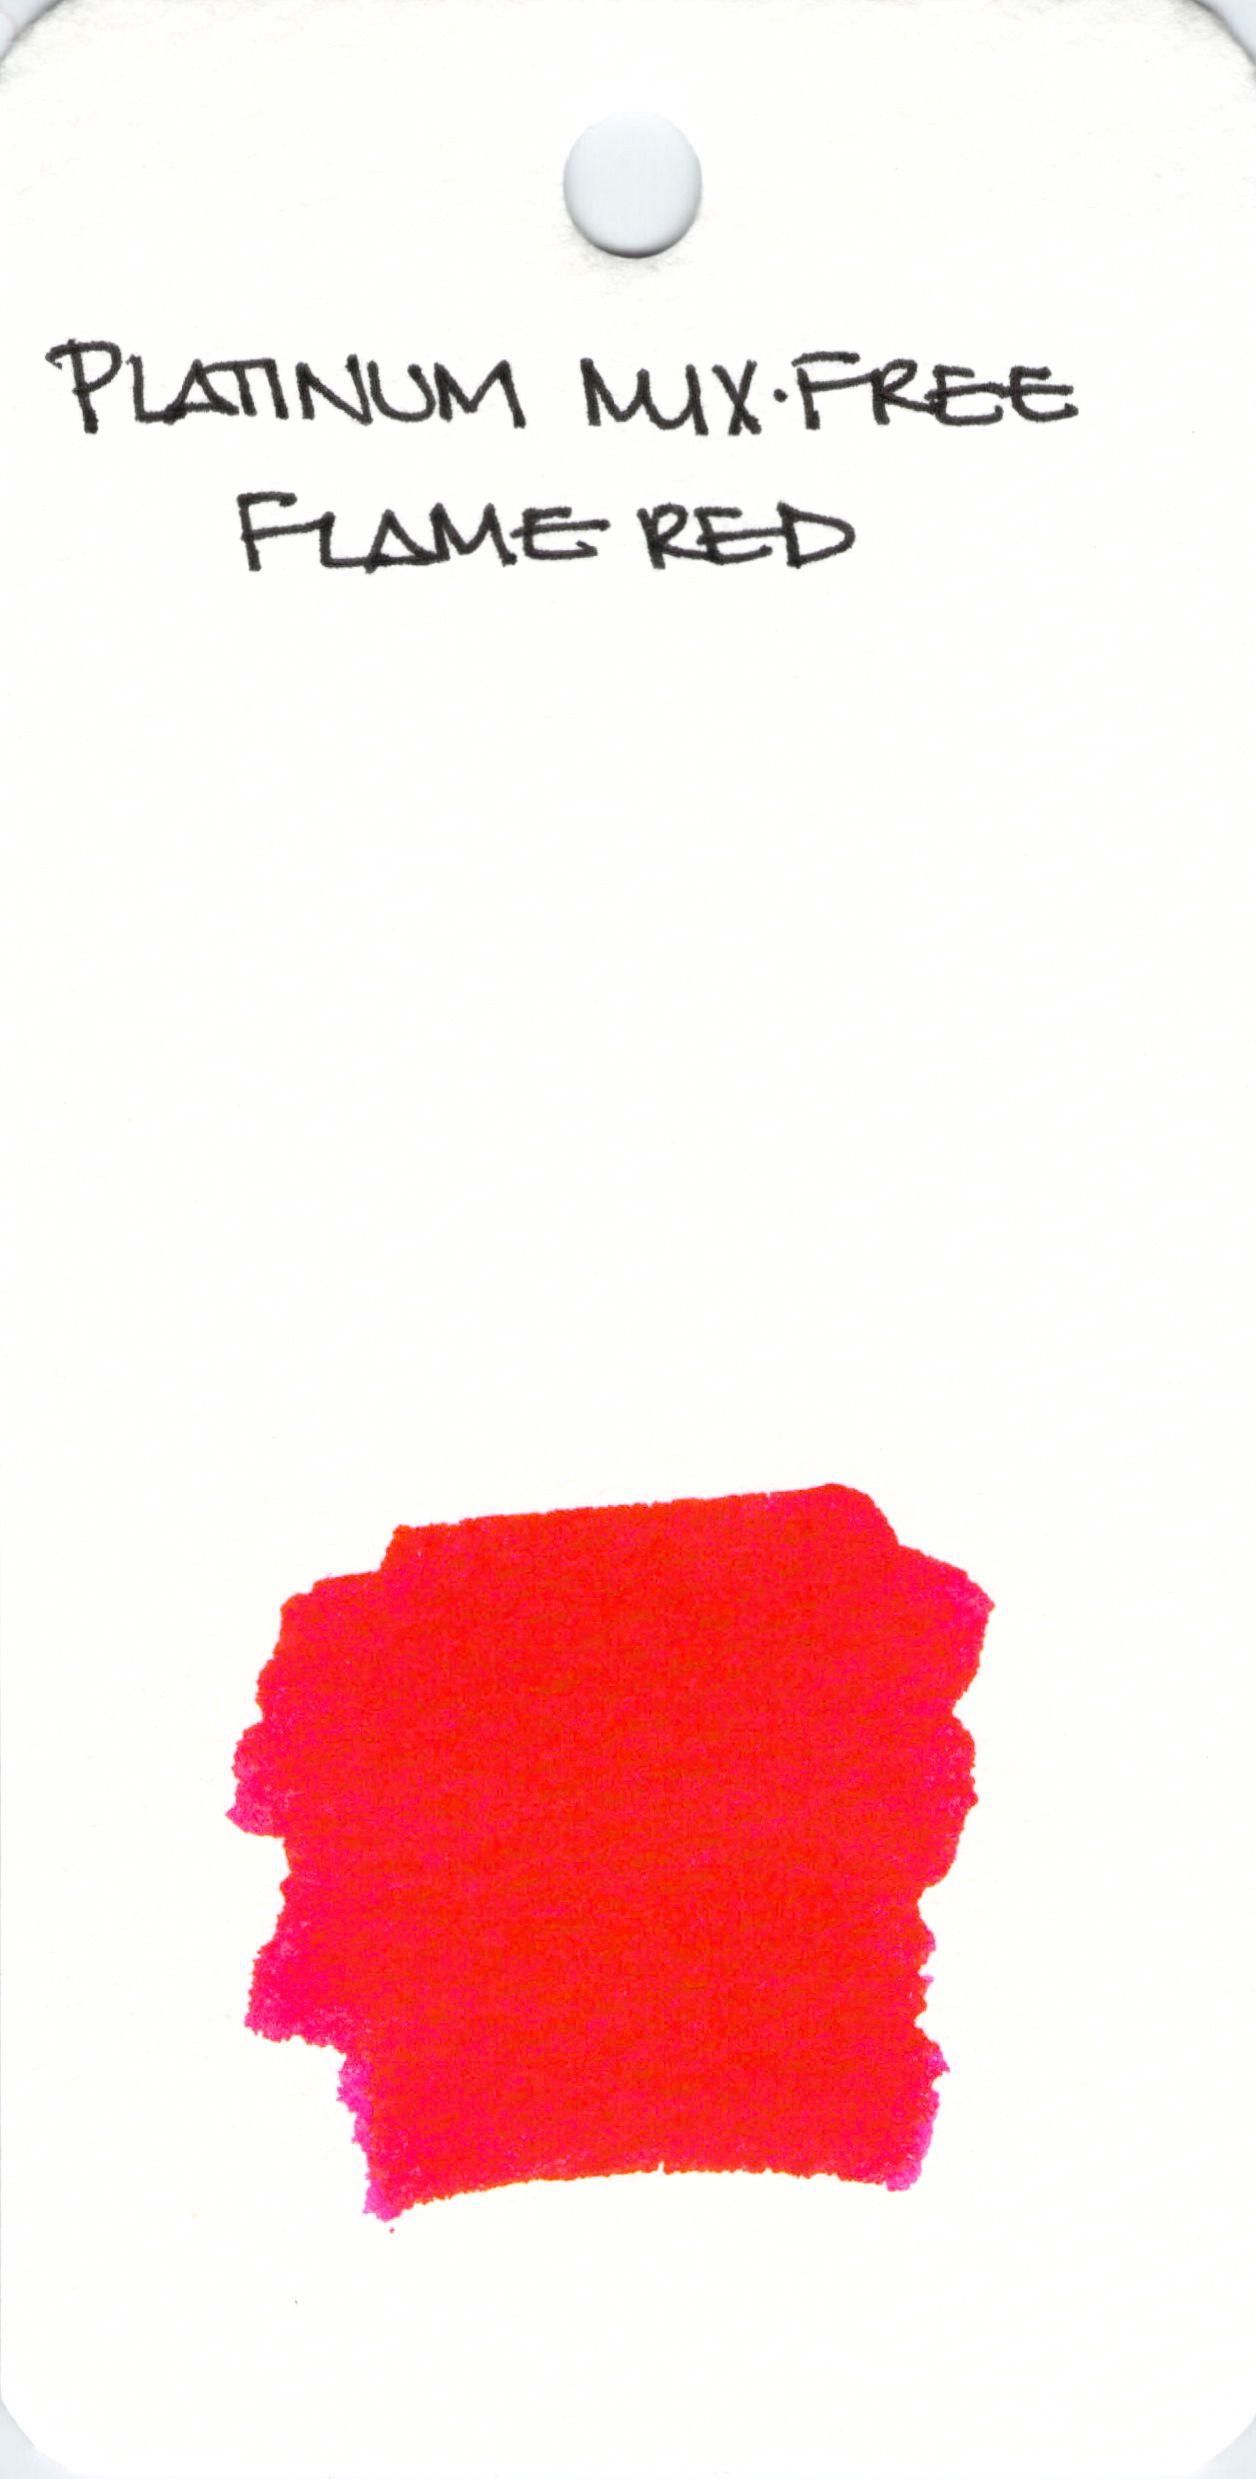 Flame On Red Rectangle Logo - INK SWAB: 166/365 – Platinum Mix-Free Flame Red | Pentulant